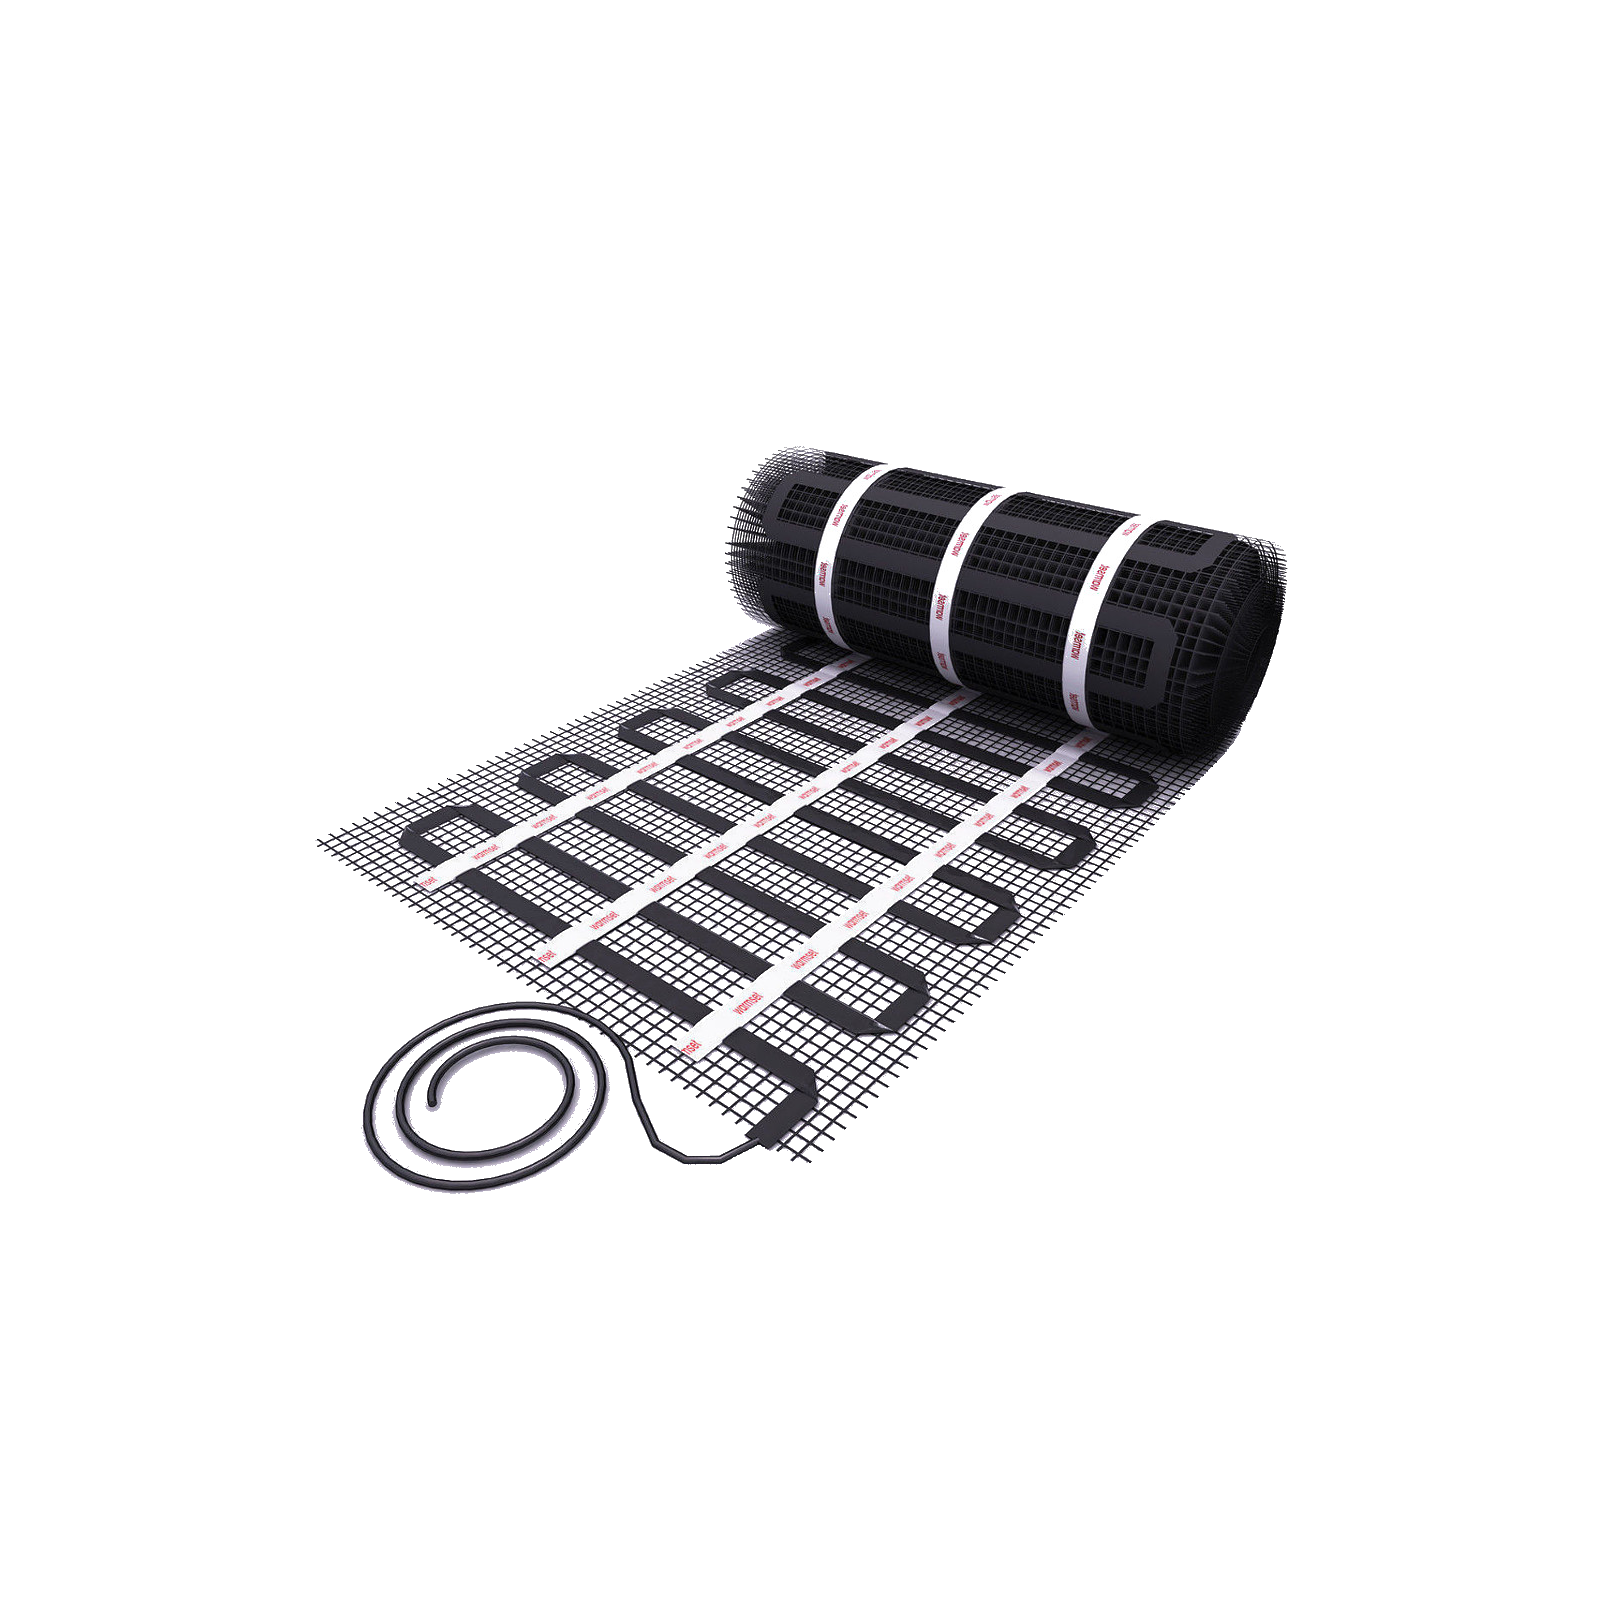 17/5 Thin-bed heating mat with flat conductor